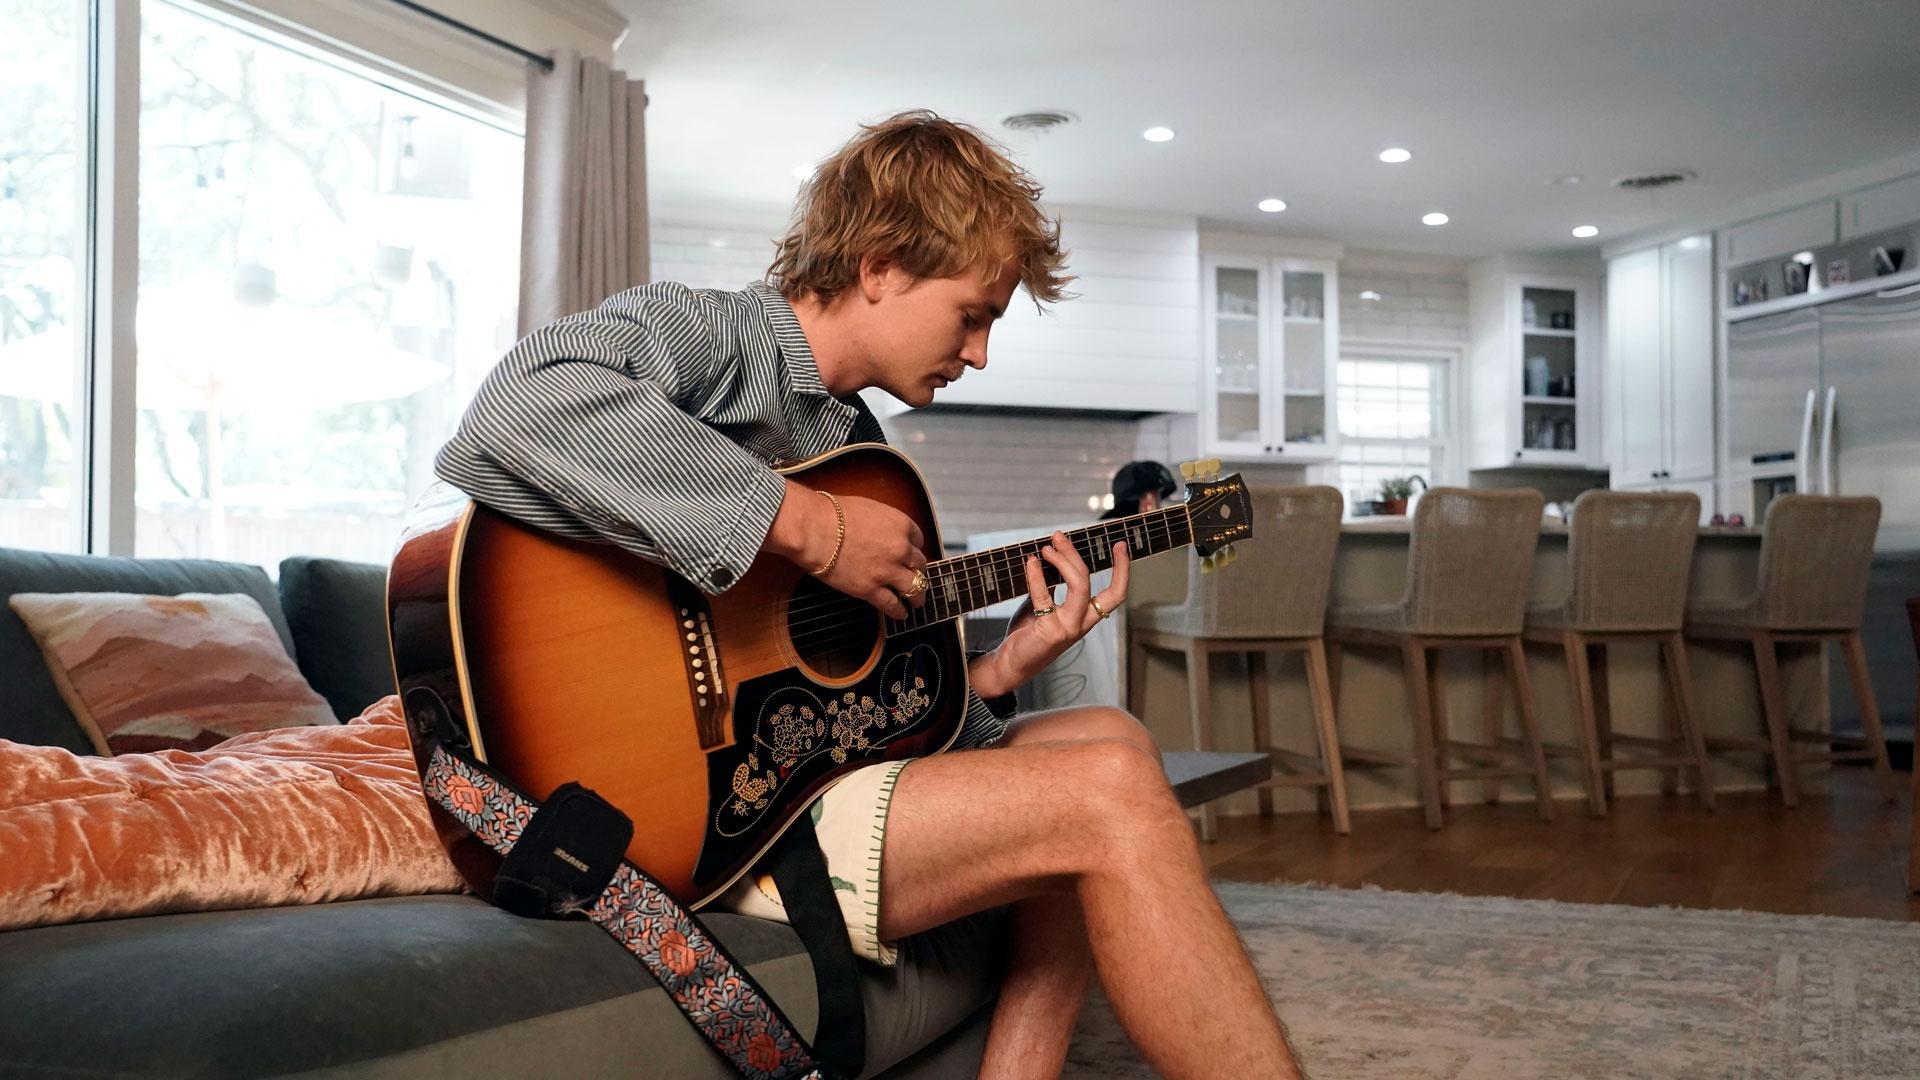 Colin Padalecki from Surfaces plays guitar in his home, as featured on Season 2 of "Texas A&M Today."